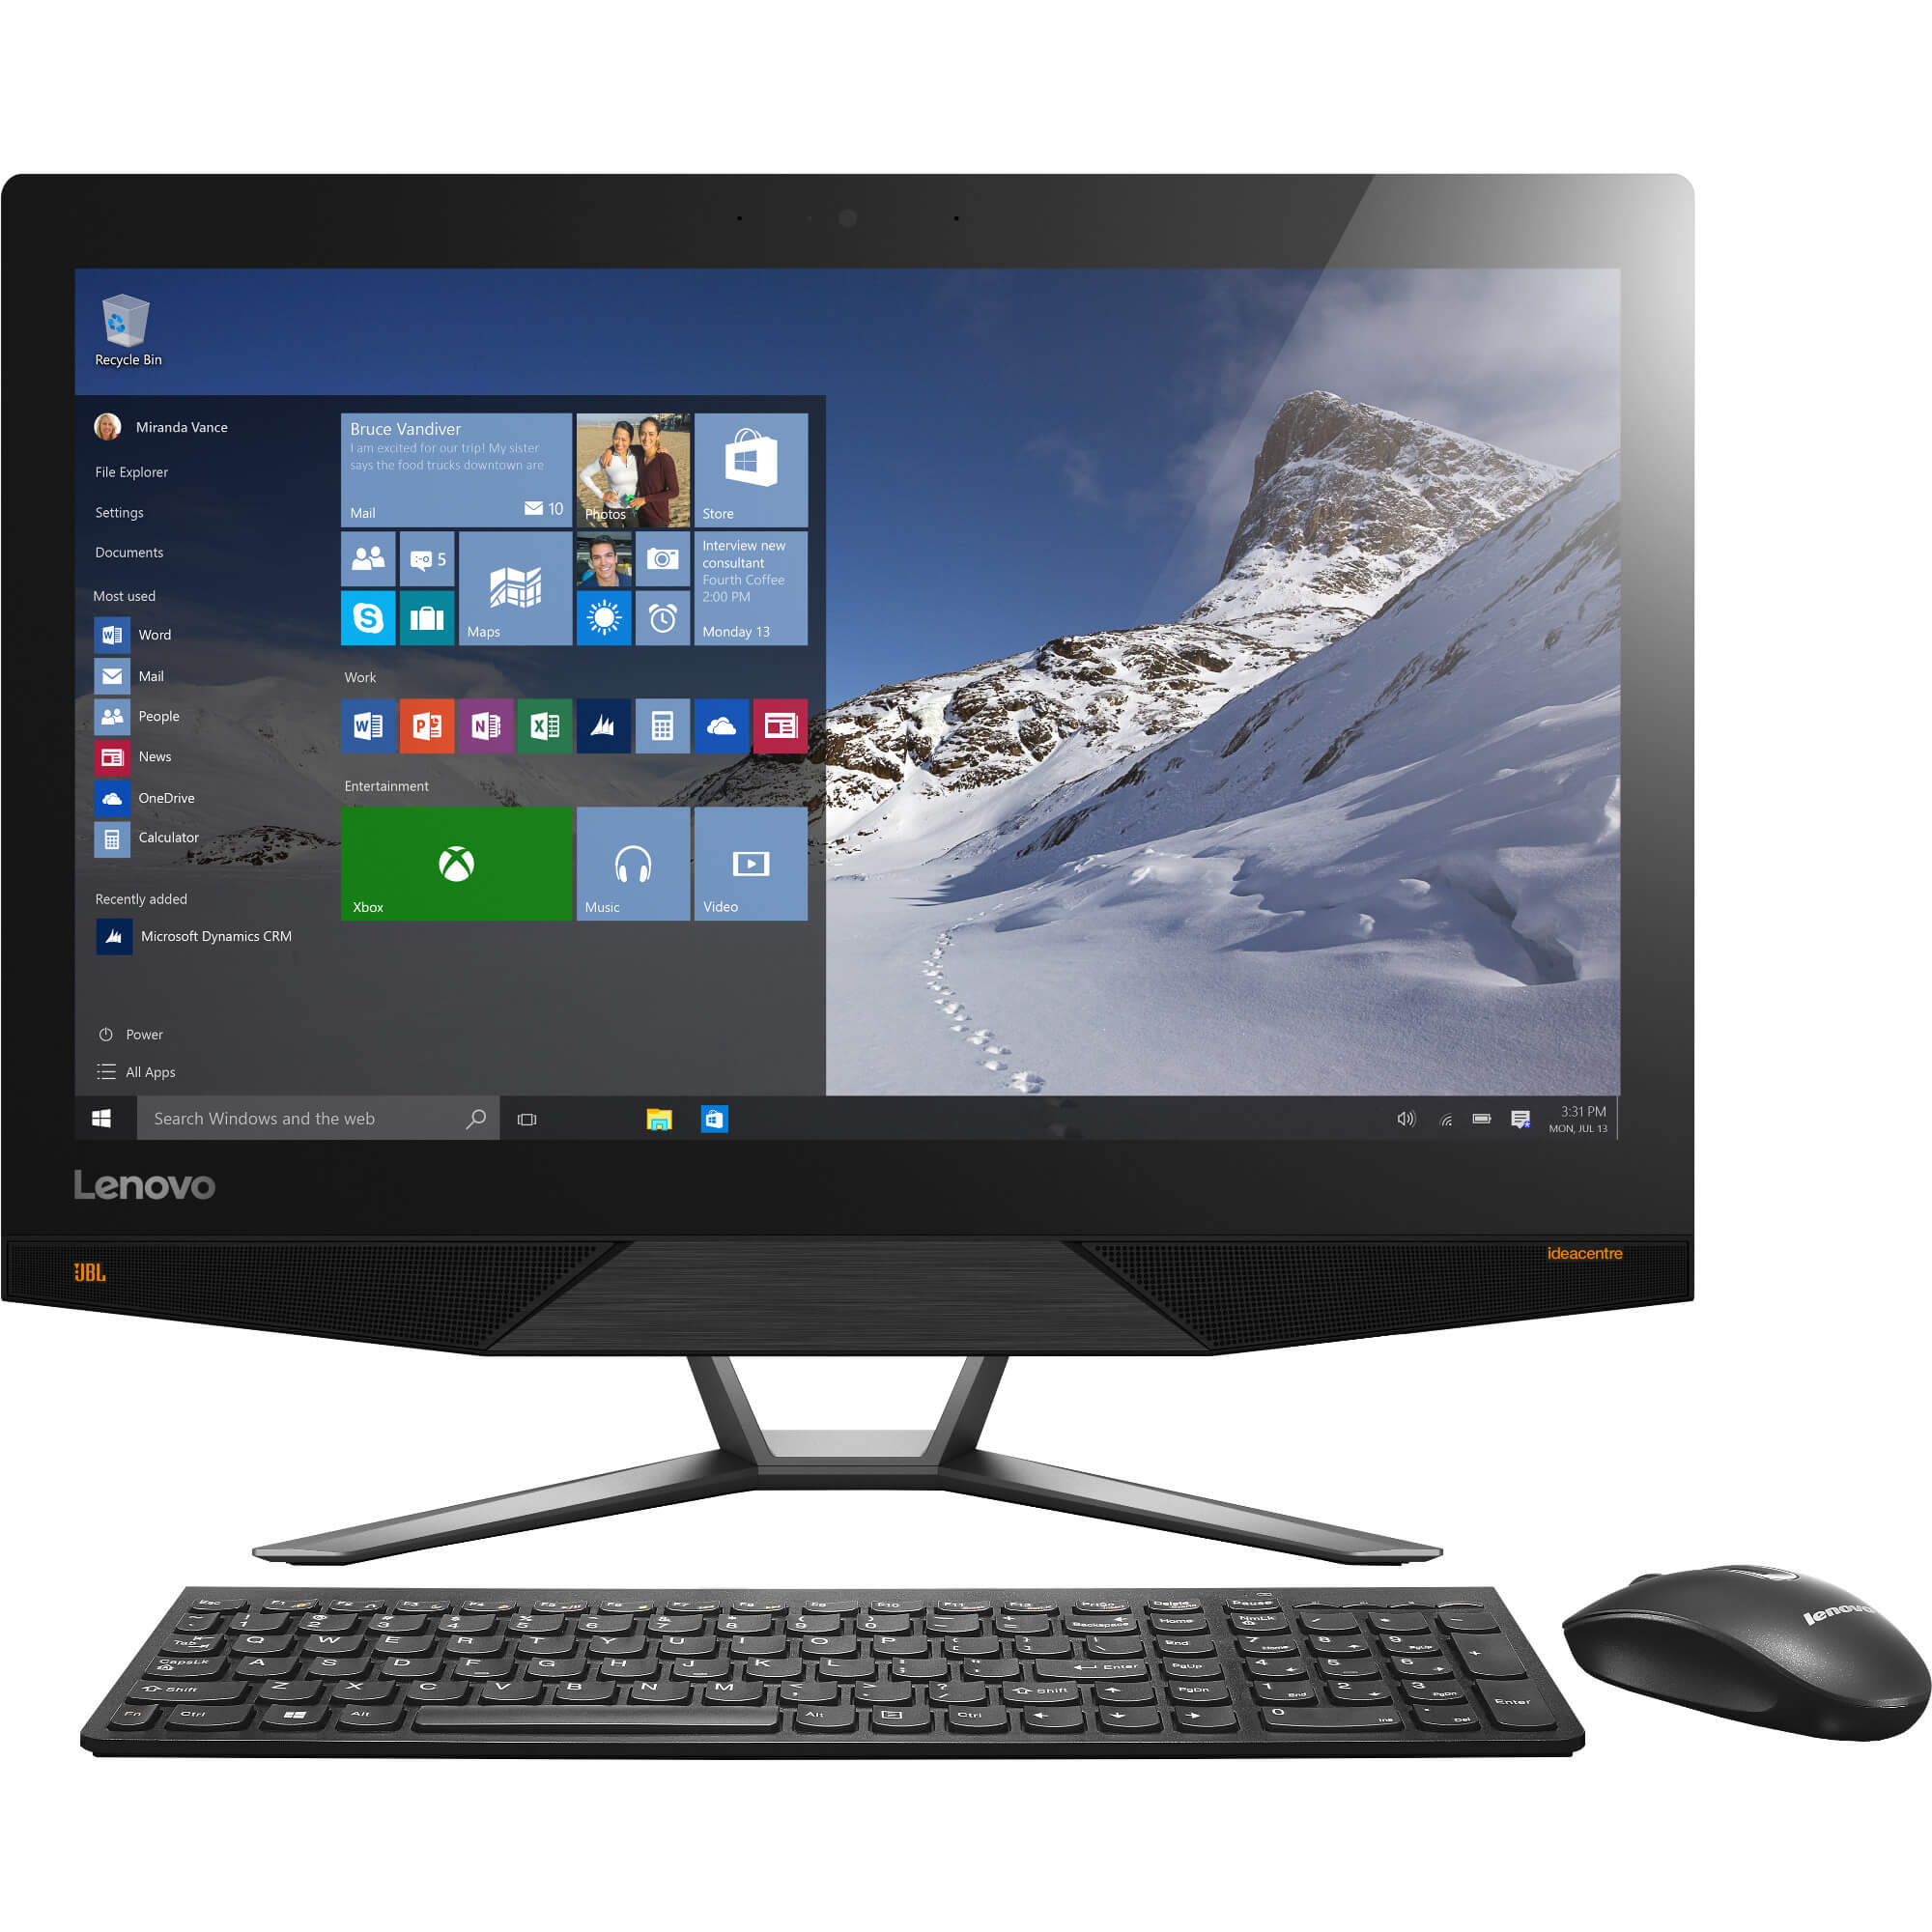  Sistem Desktop PC All-In-One Lenovo IdeaCentre 700-22ISH, Intel Core i3-6100T, 8GB DDR4, HDD 1TB, nVidia GeForce GT 930A 2GB, Free DOS 